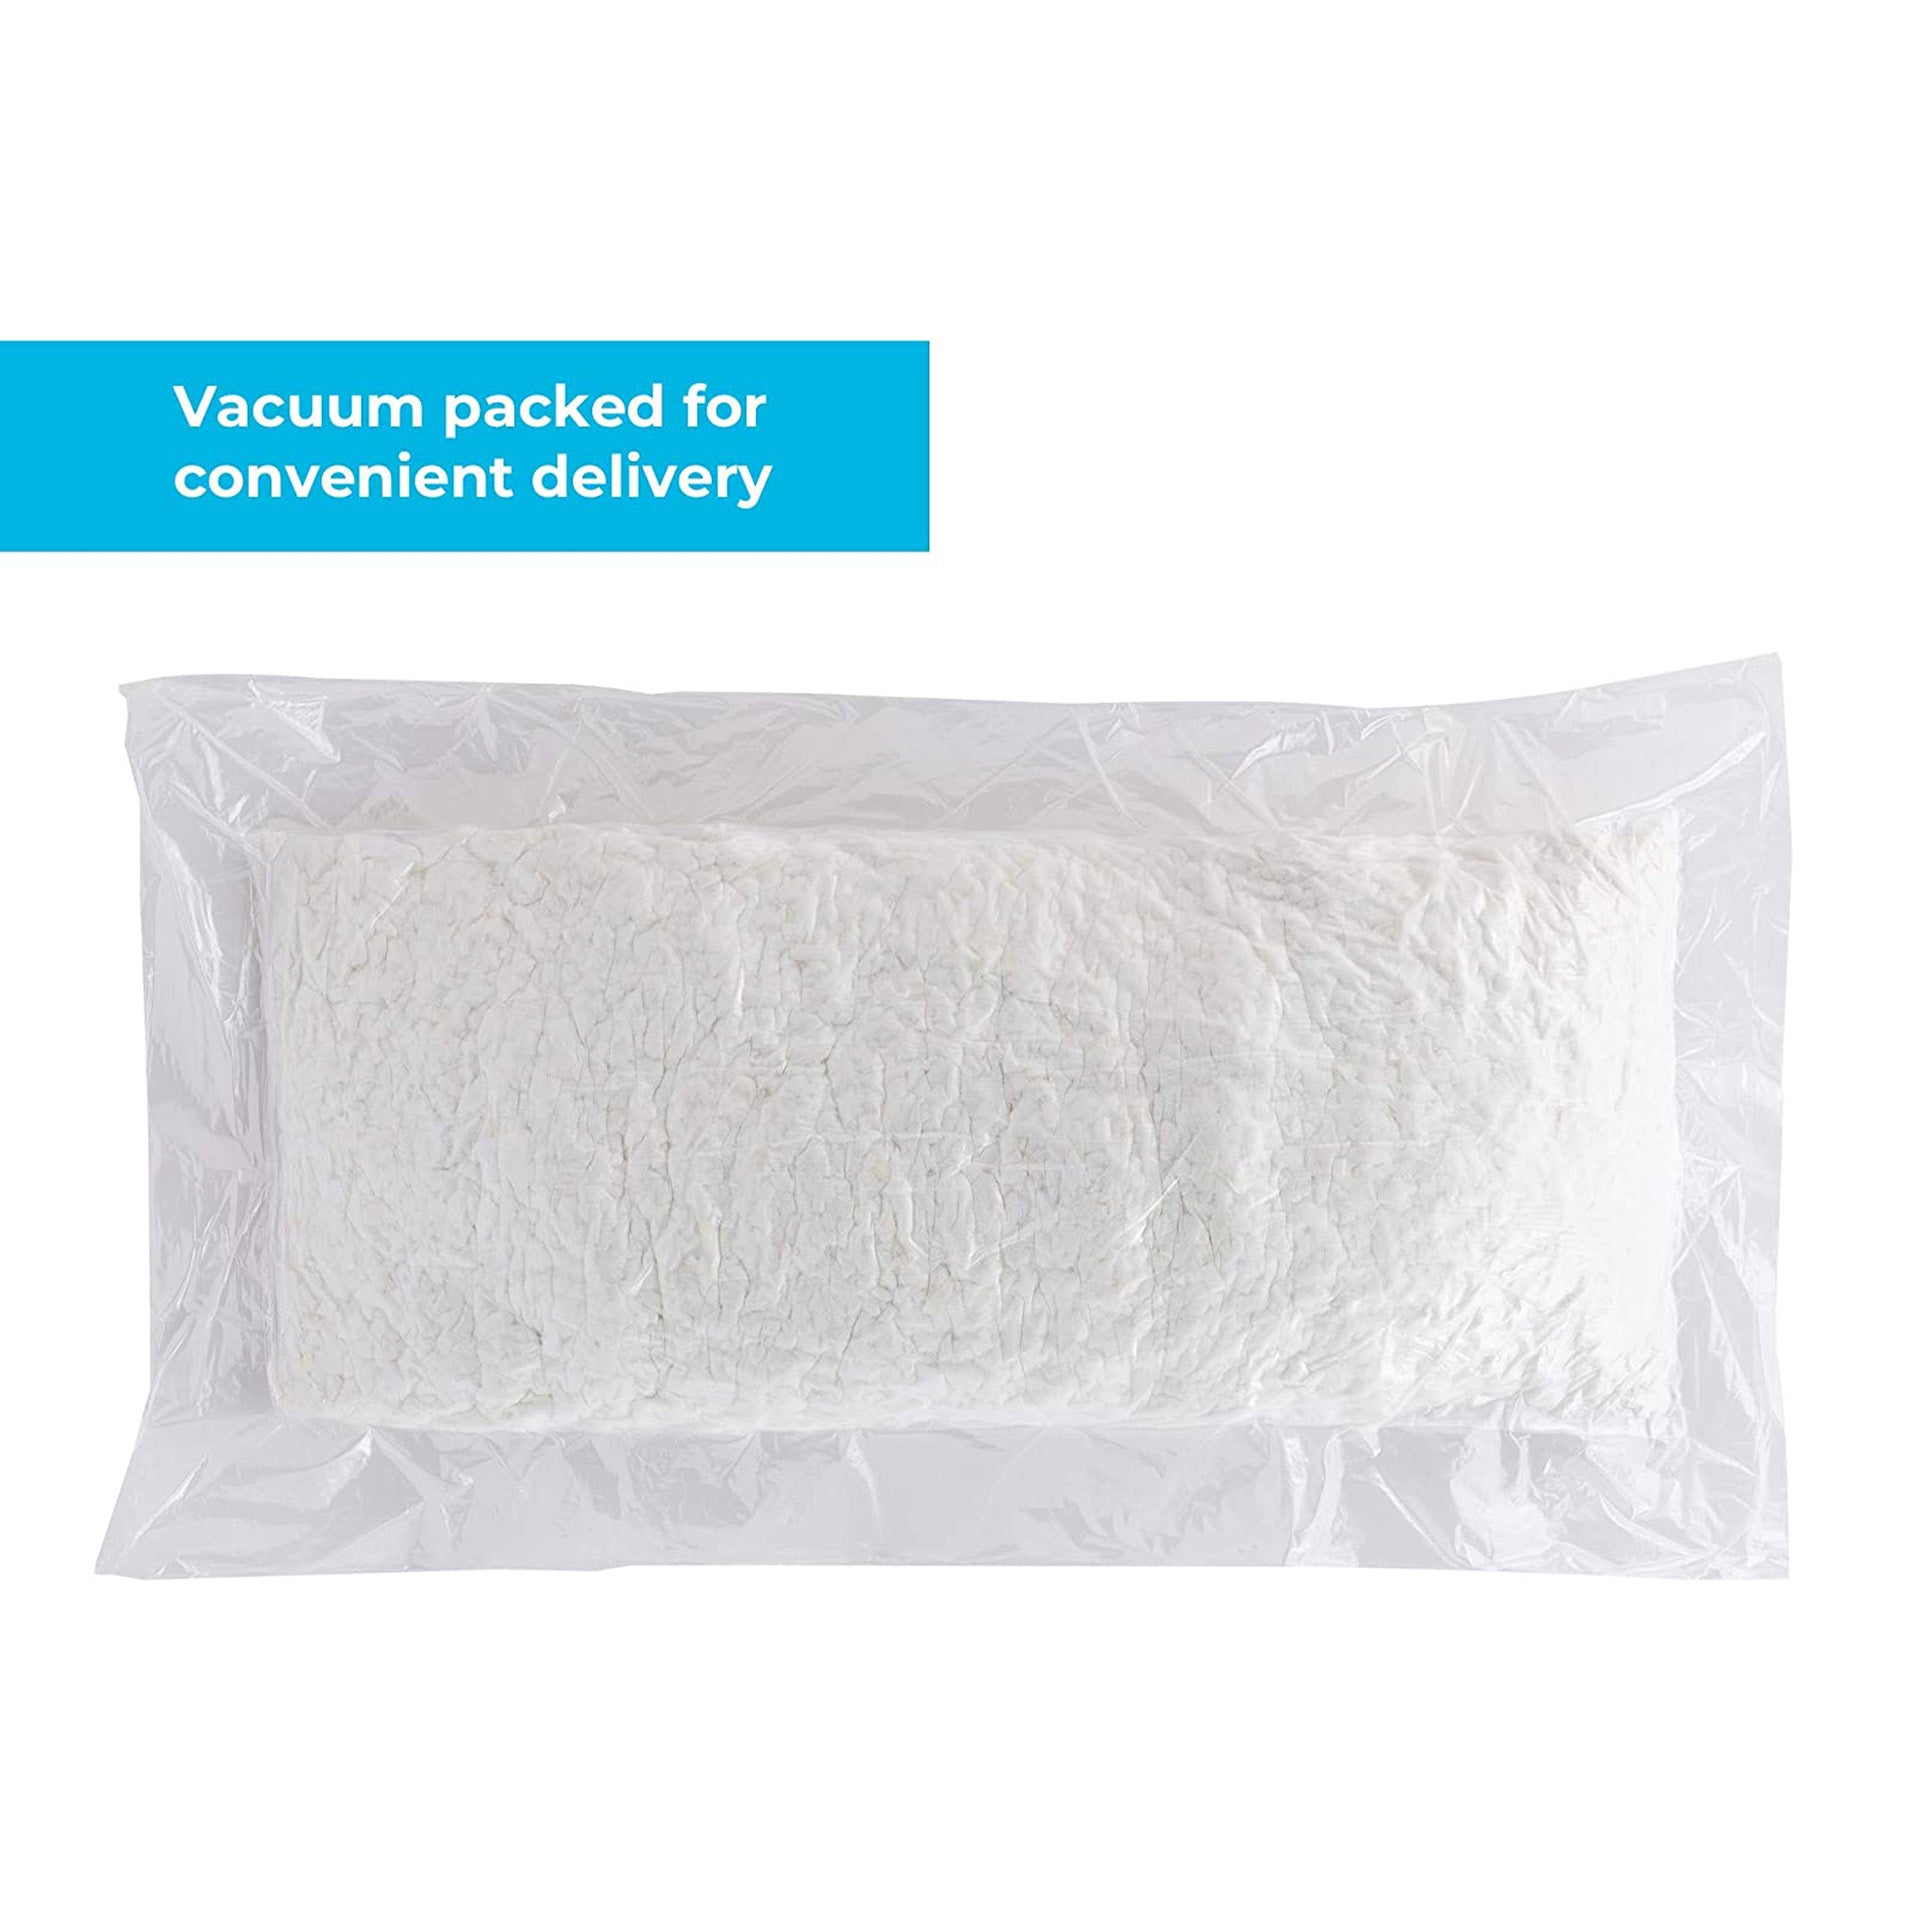 Shredded foam - Foshan Alforu Technology-- Provide you with one-stop foam  products solutions